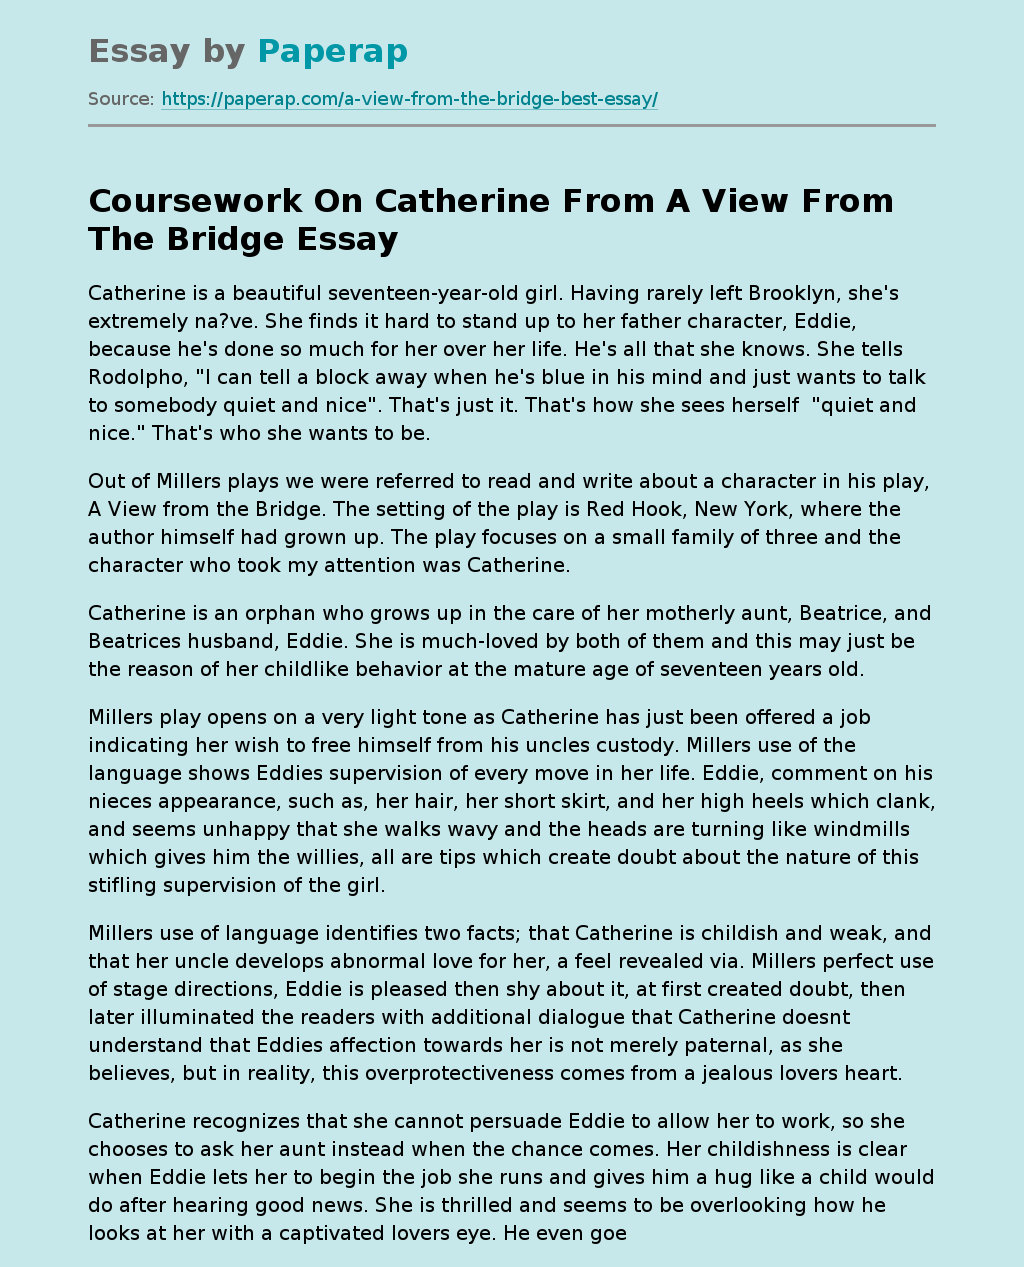 Coursework On Catherine From A View From The Bridge